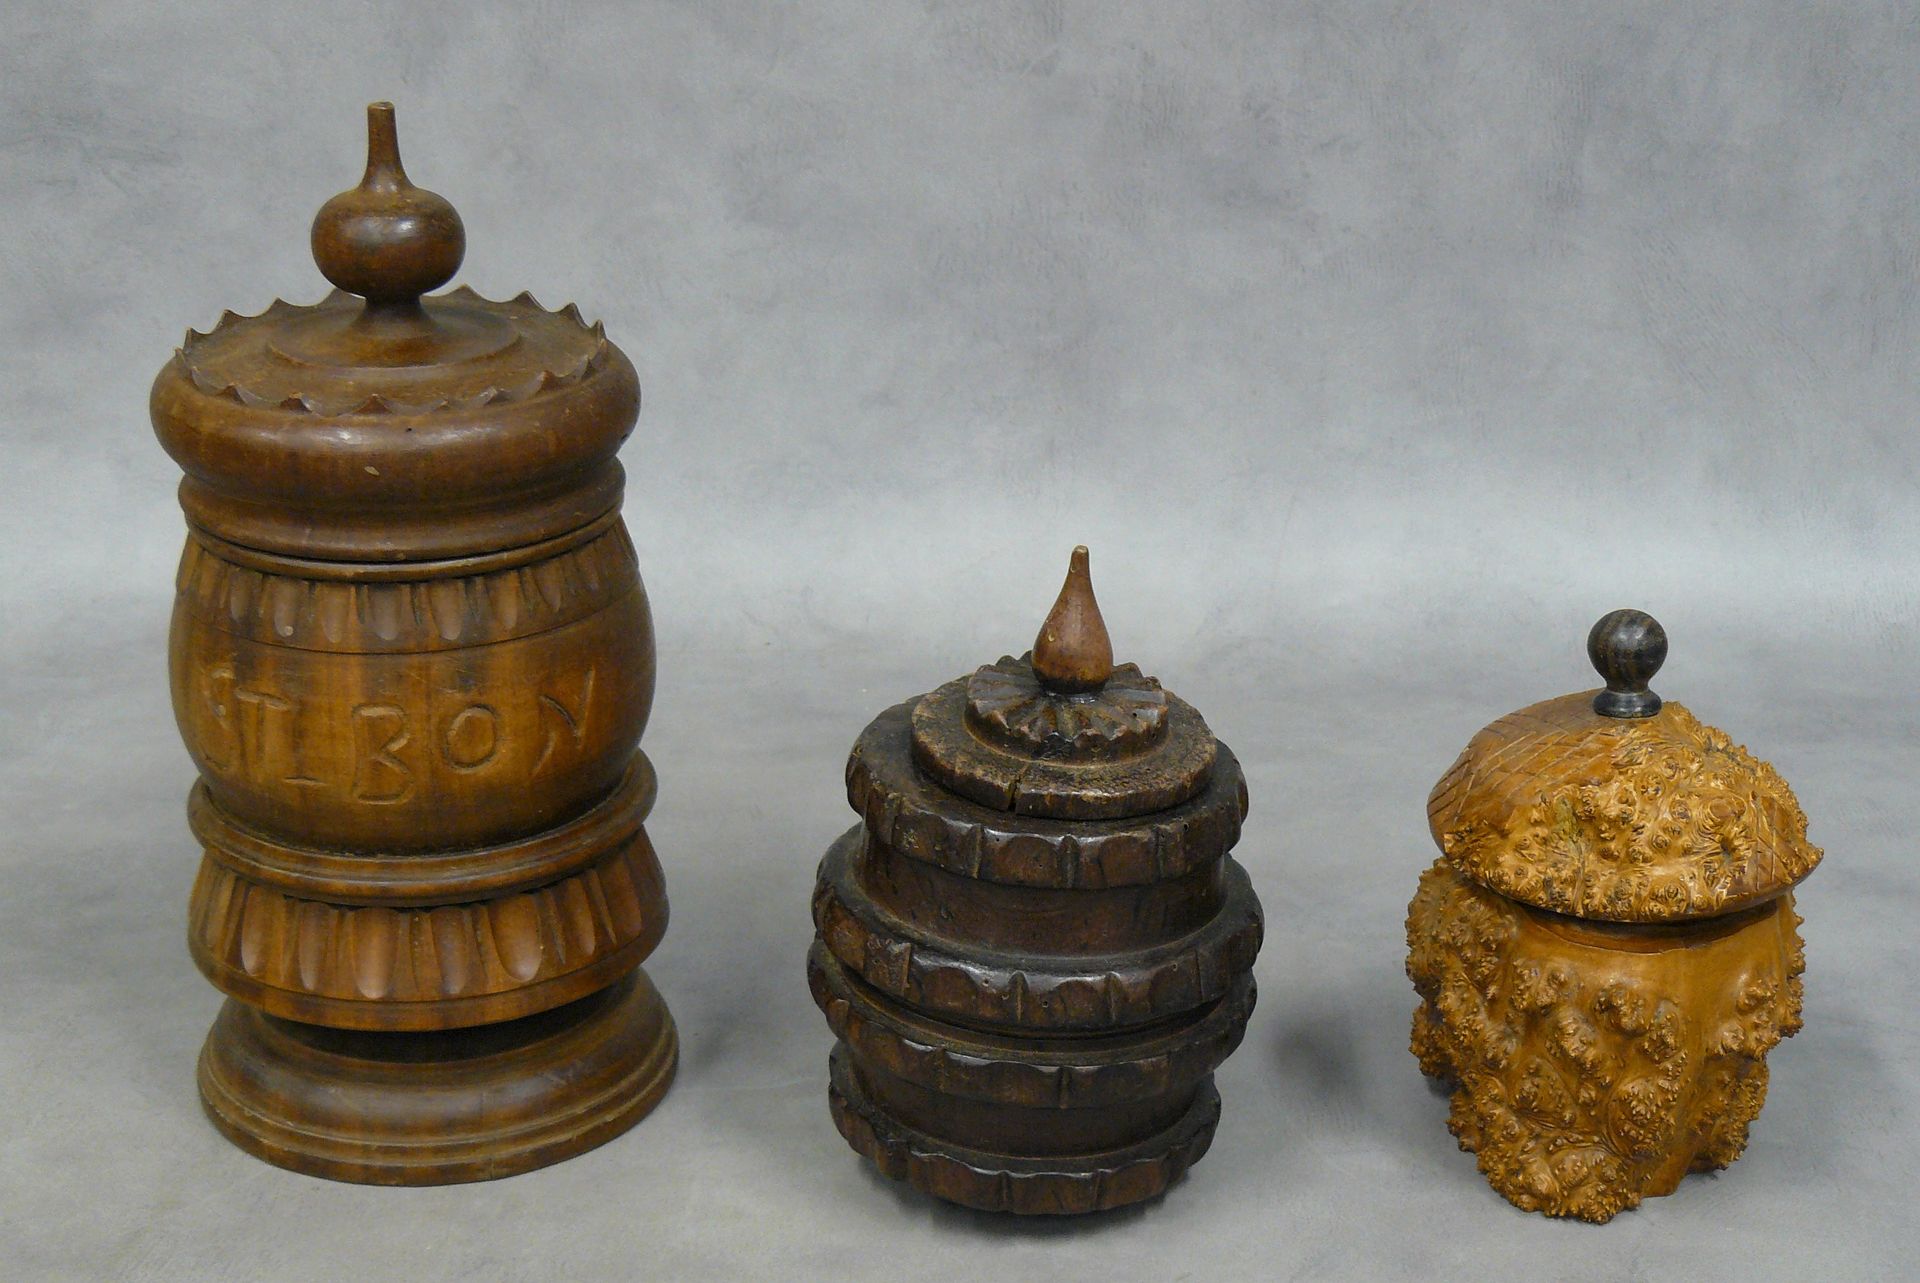 Null a set of three wooden tobacco pots, one marked St Bon - 16,5 to 29,5 cm